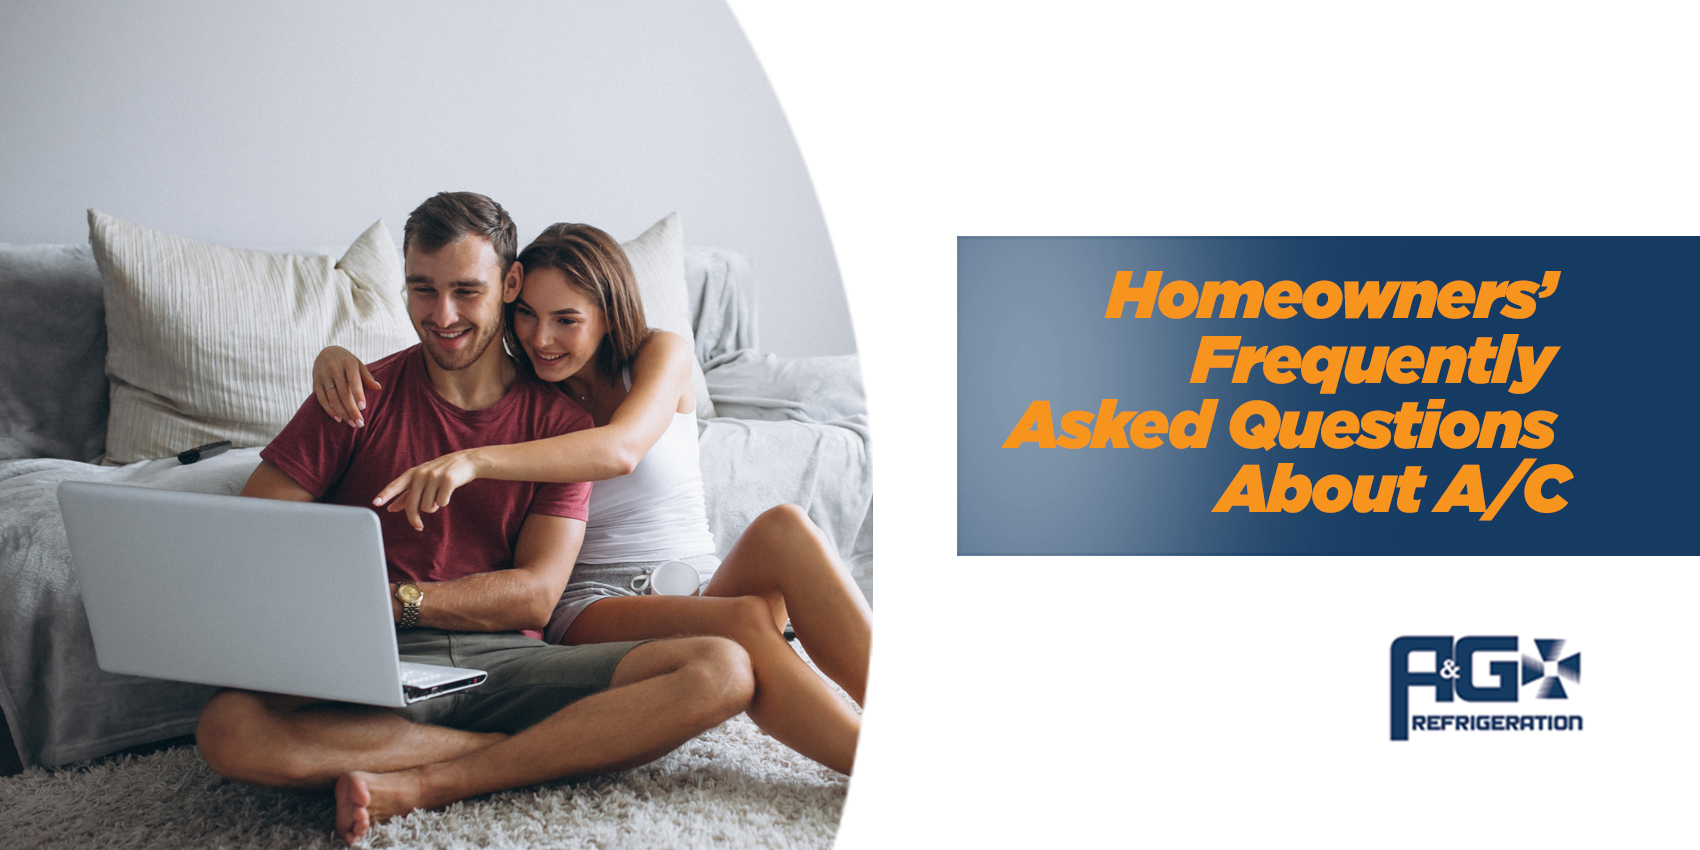 Homeowners’ Frequently Asked Questions About A/C